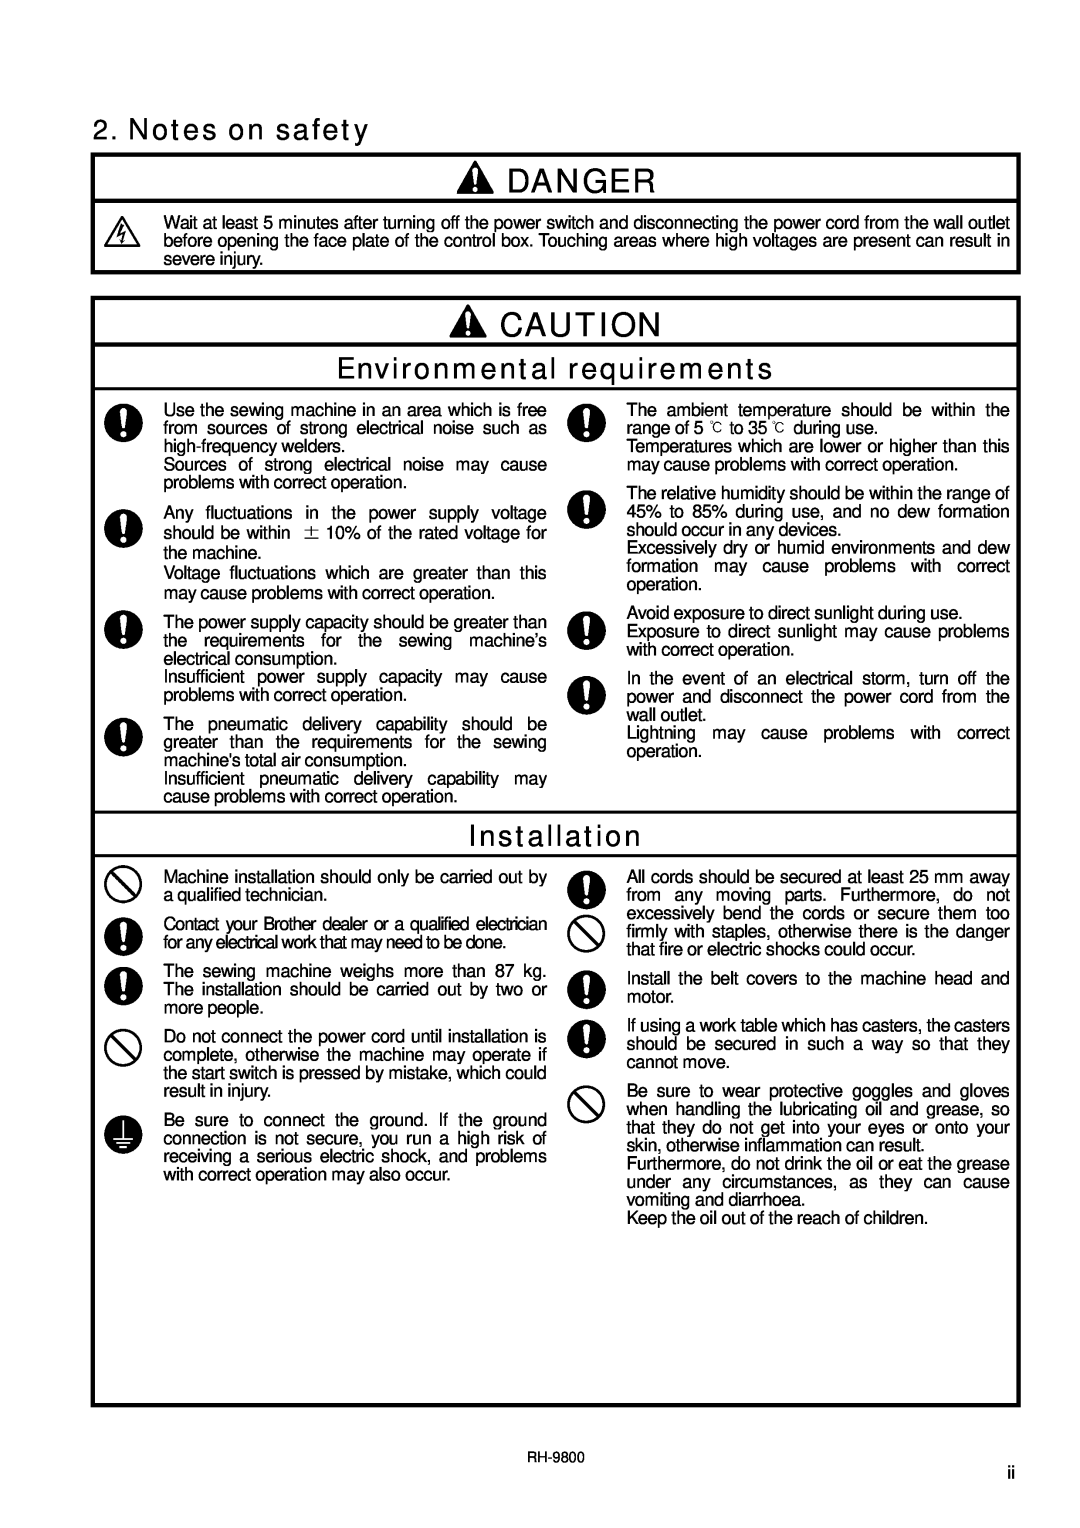 Brother DH4-B980 instruction manual Danger, Notes on safety, Environmental requirements, Installation 